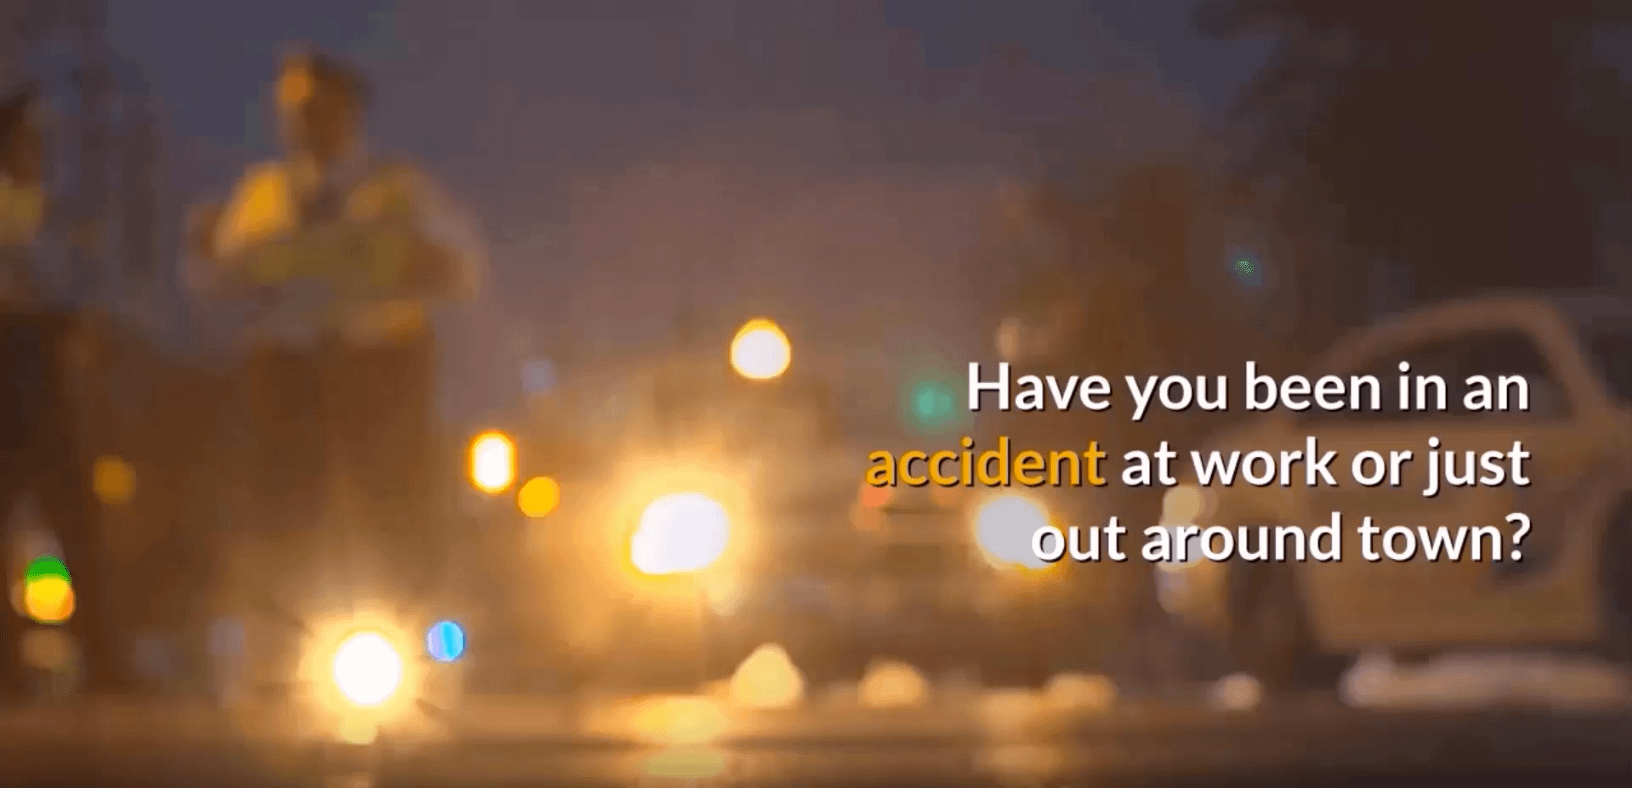 Have You Been Injured In An Accident? You May Need A Personal Injury Lawyer